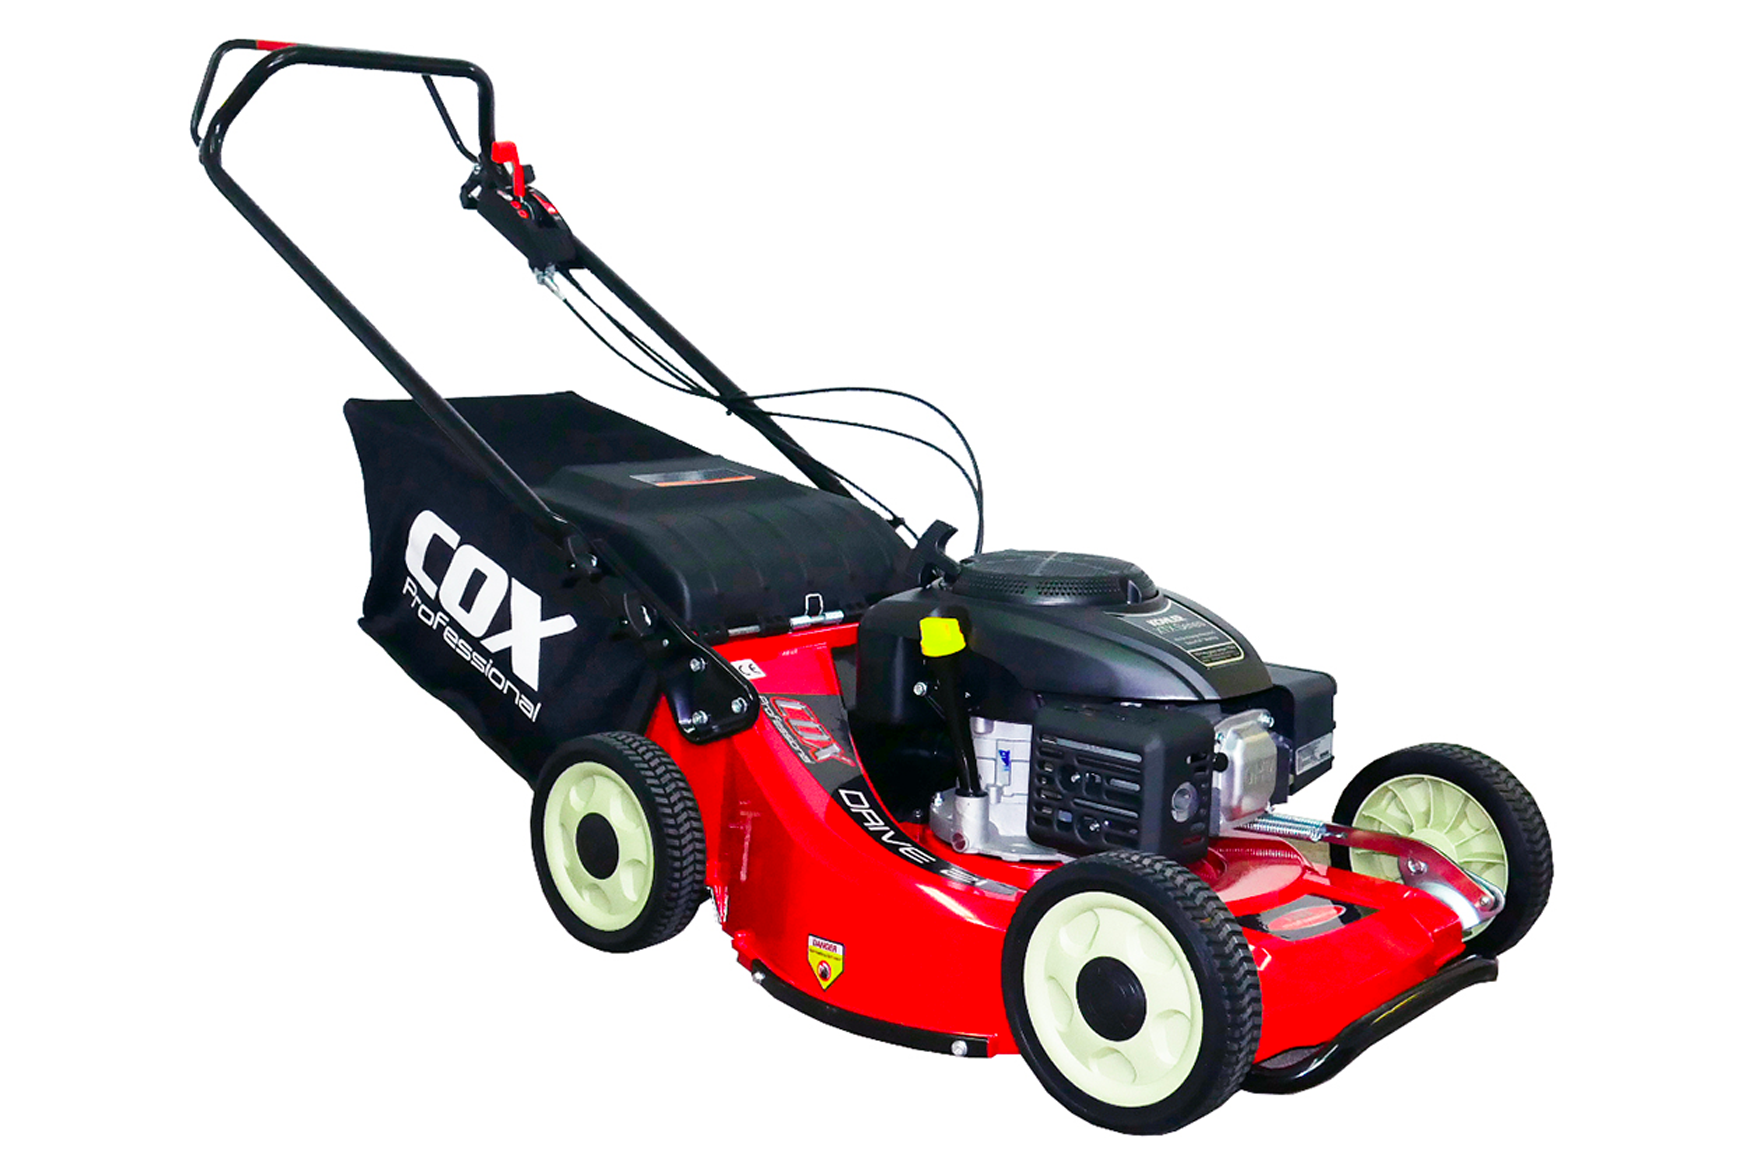 Photo of a Professional Series Drive 21 walk behind mower